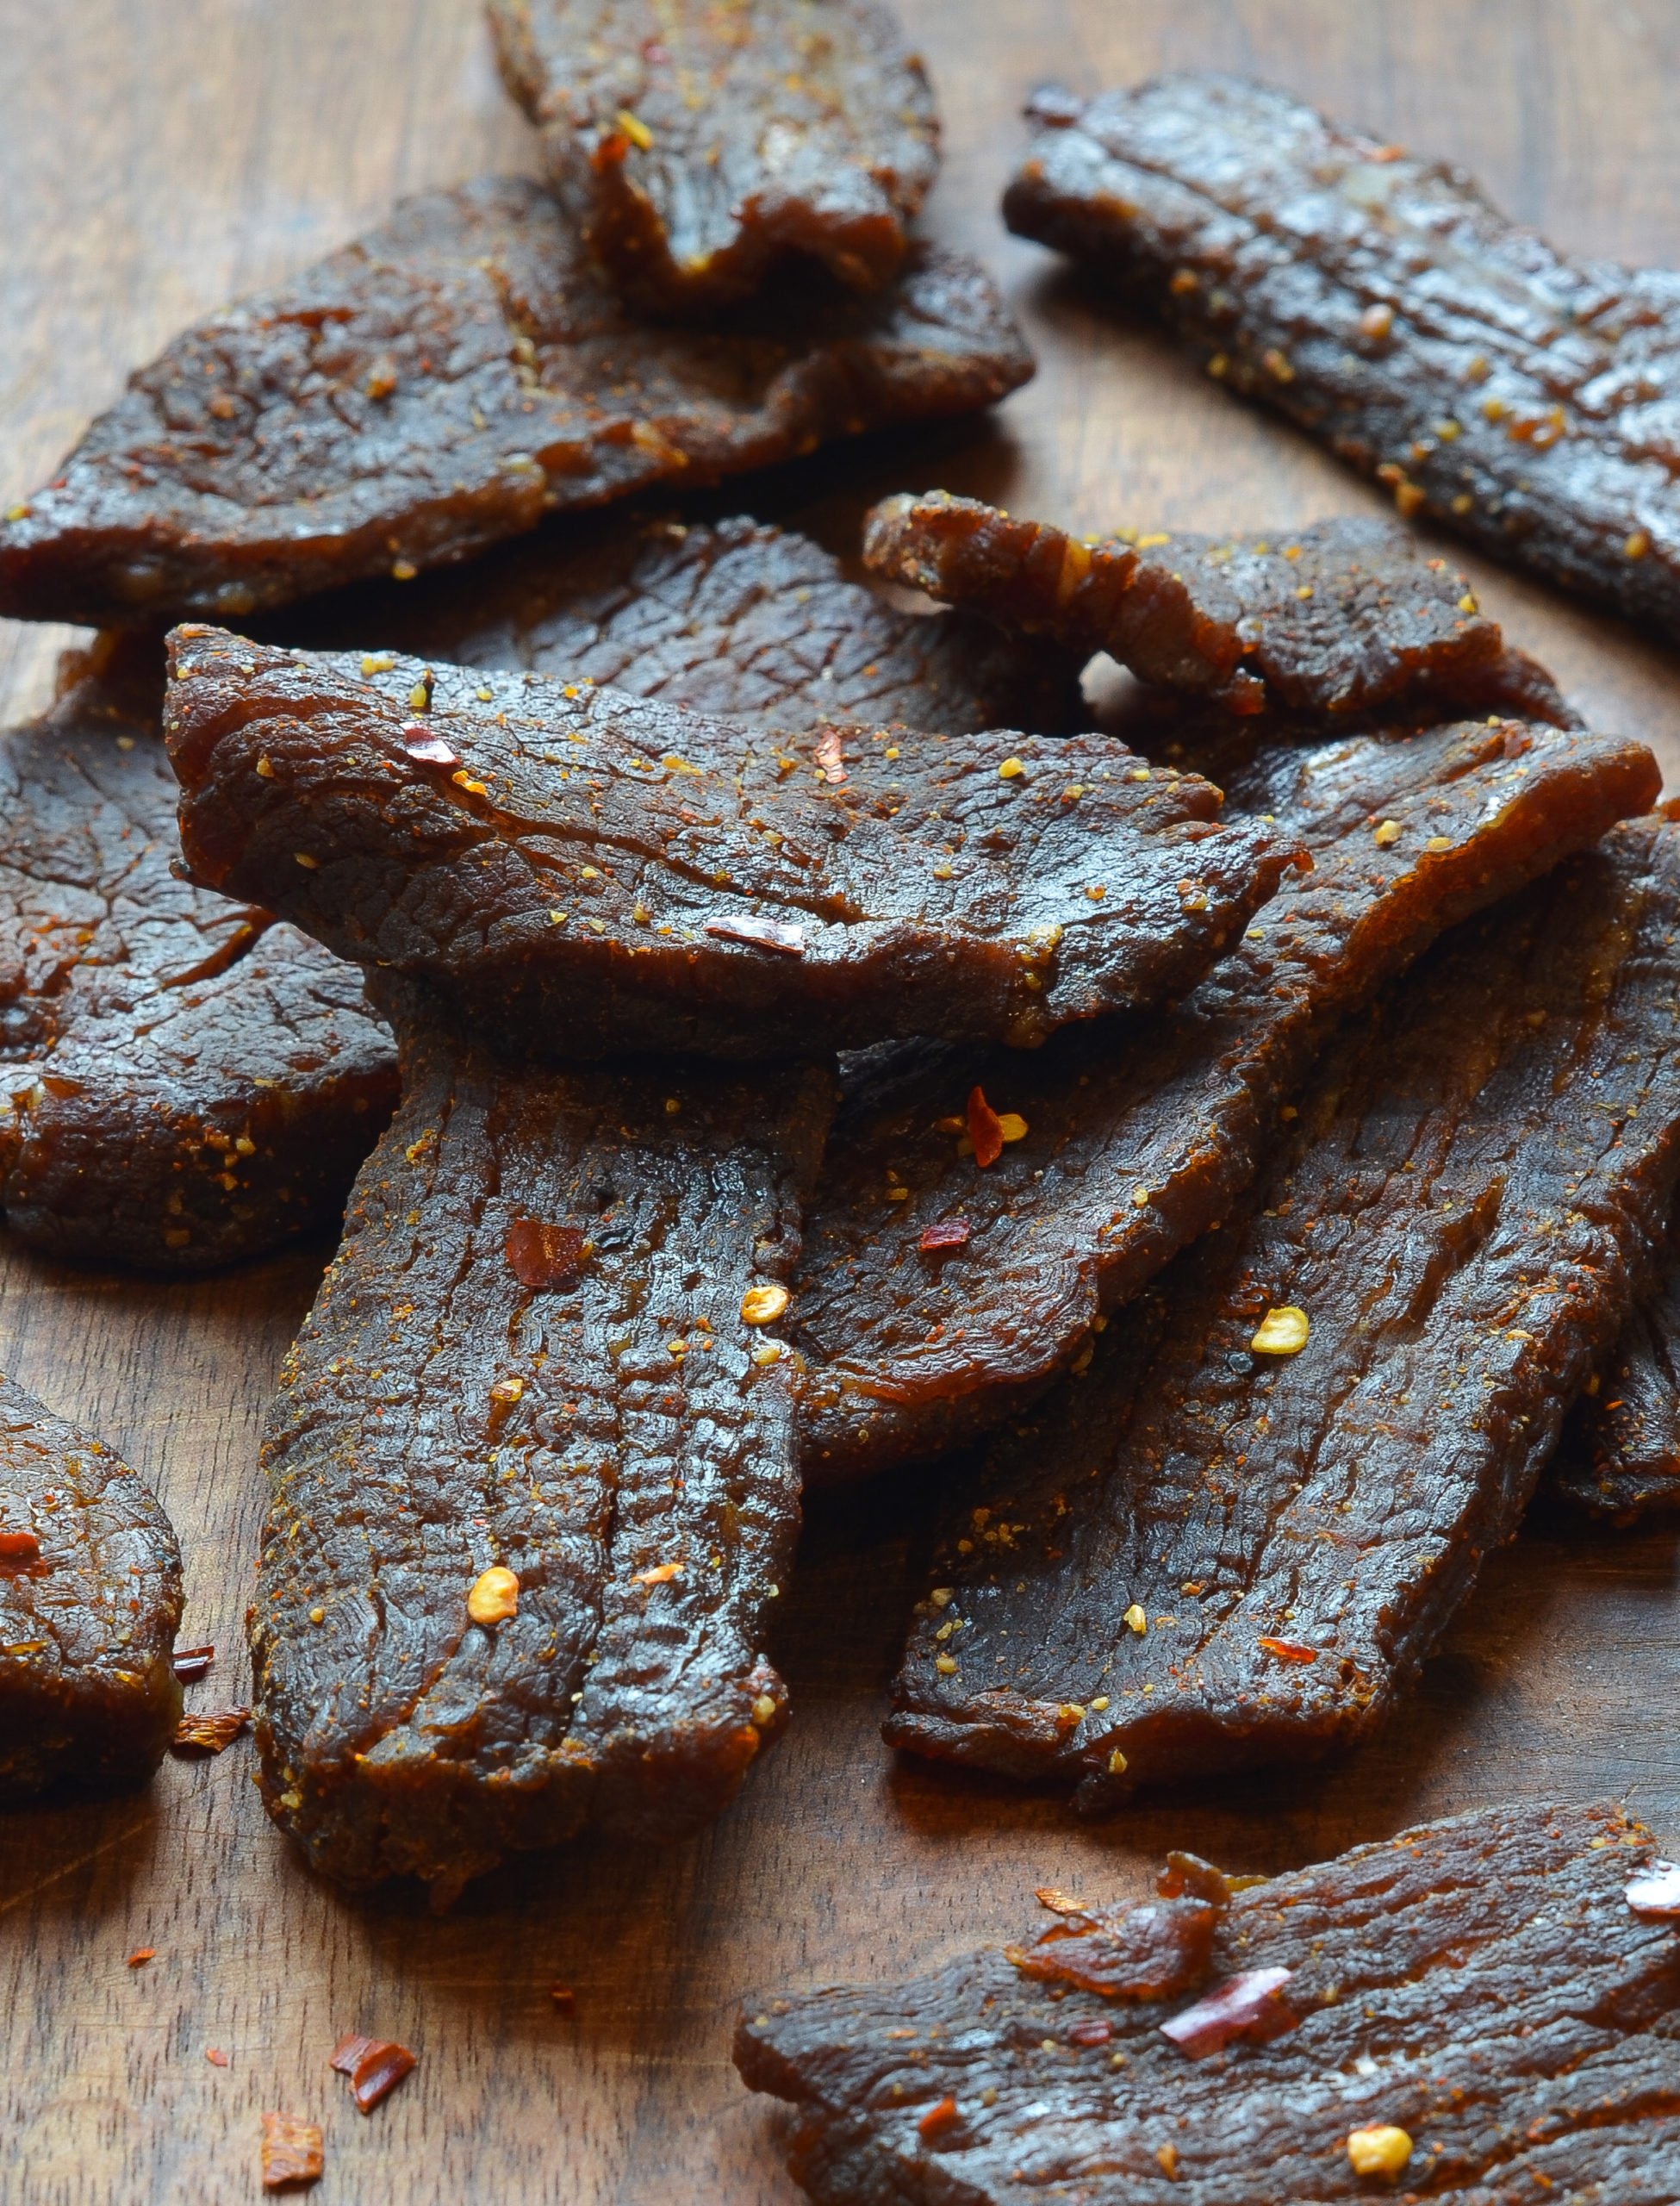 How To Make Beef Jerky in a Food Dehydrator